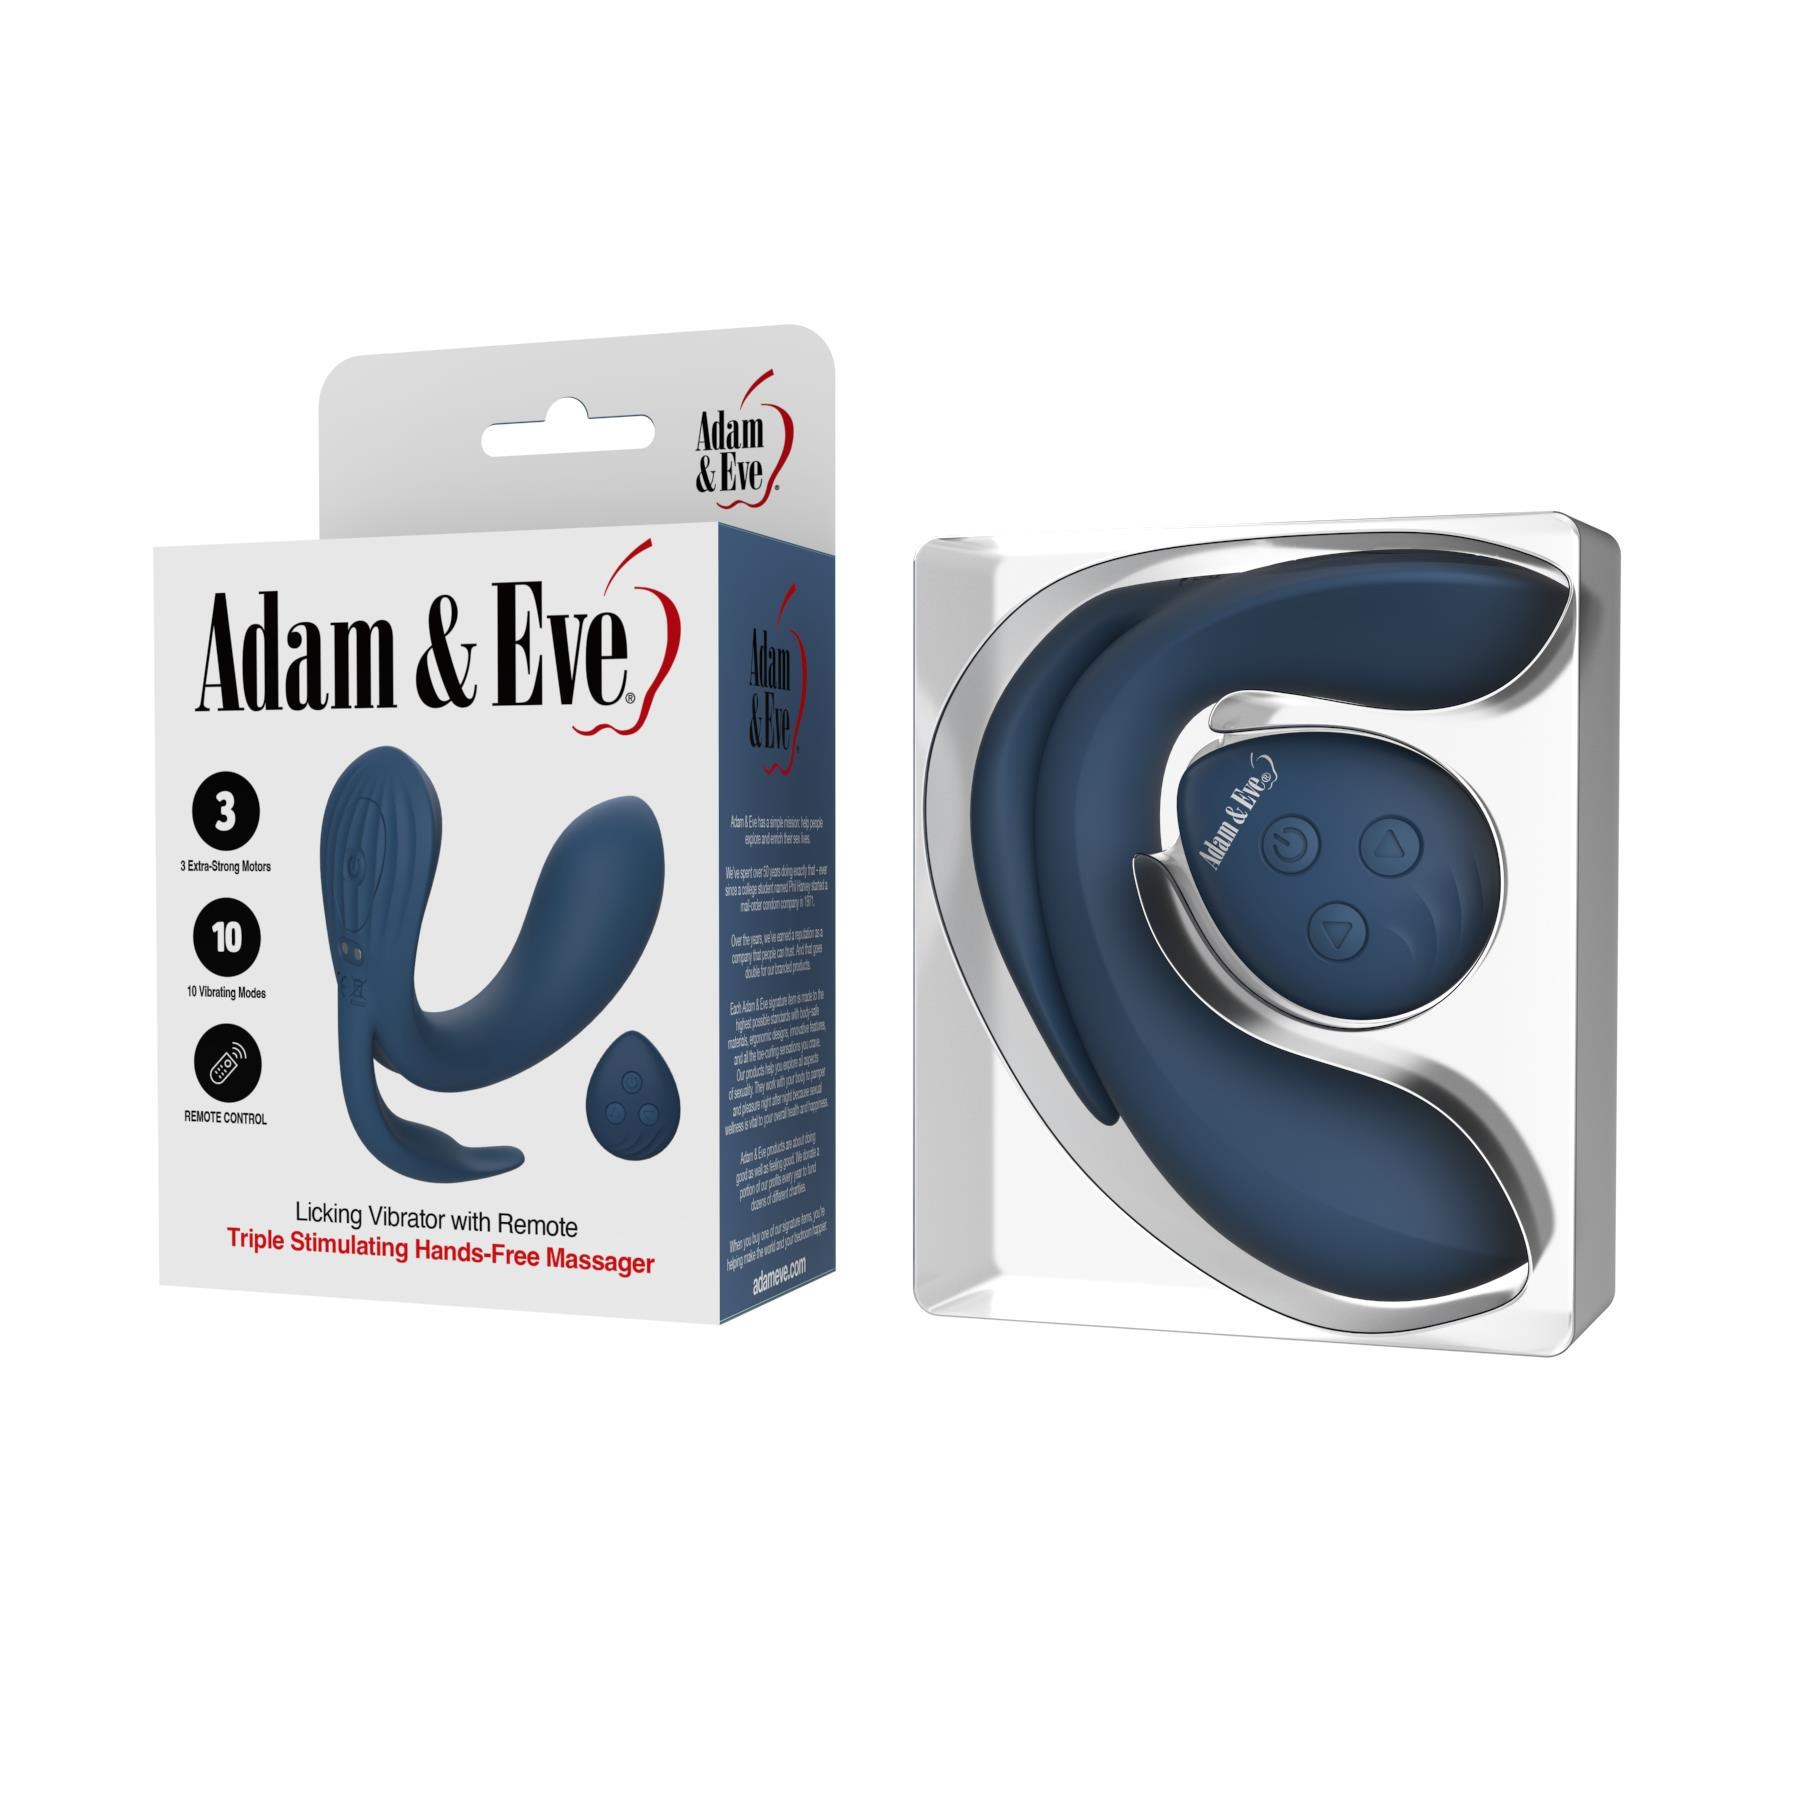 Adam & Eve Licking Vibrator With Remote Control Product Inside Box